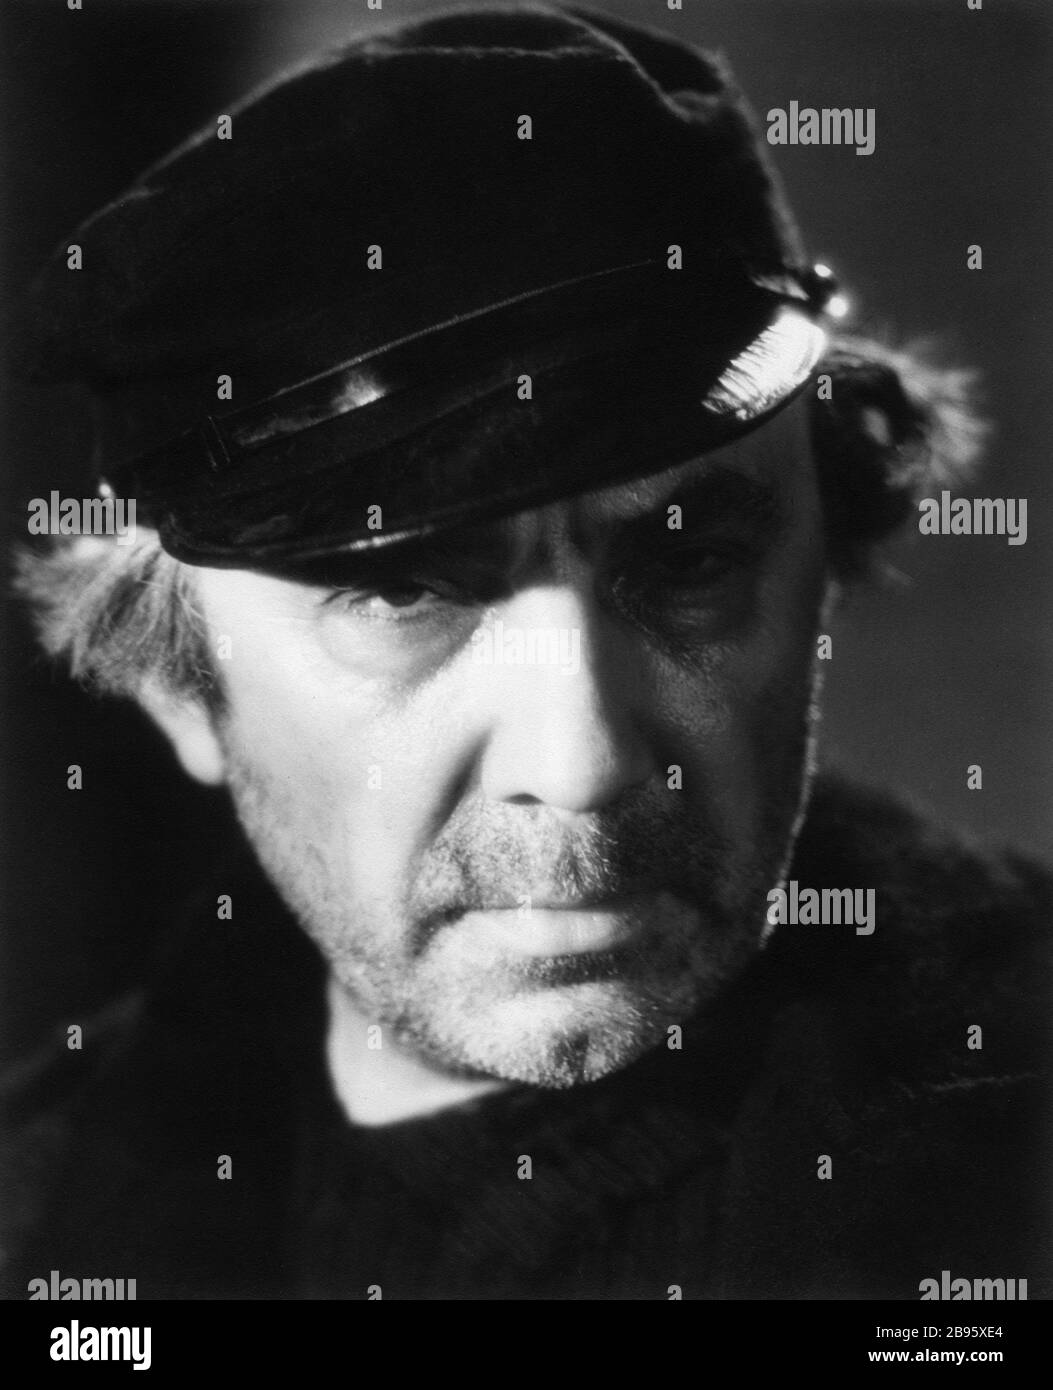 BELA LUGOSI Publicity Portrait as Anton Lorenzen in THE MYSTERY OF THE MARY CELESTE aka PHANTOM SHIP ( US title) 1935 director and story Denison Clift  A Hammer Film Production / General Film Distributors (GFD) Stock Photo